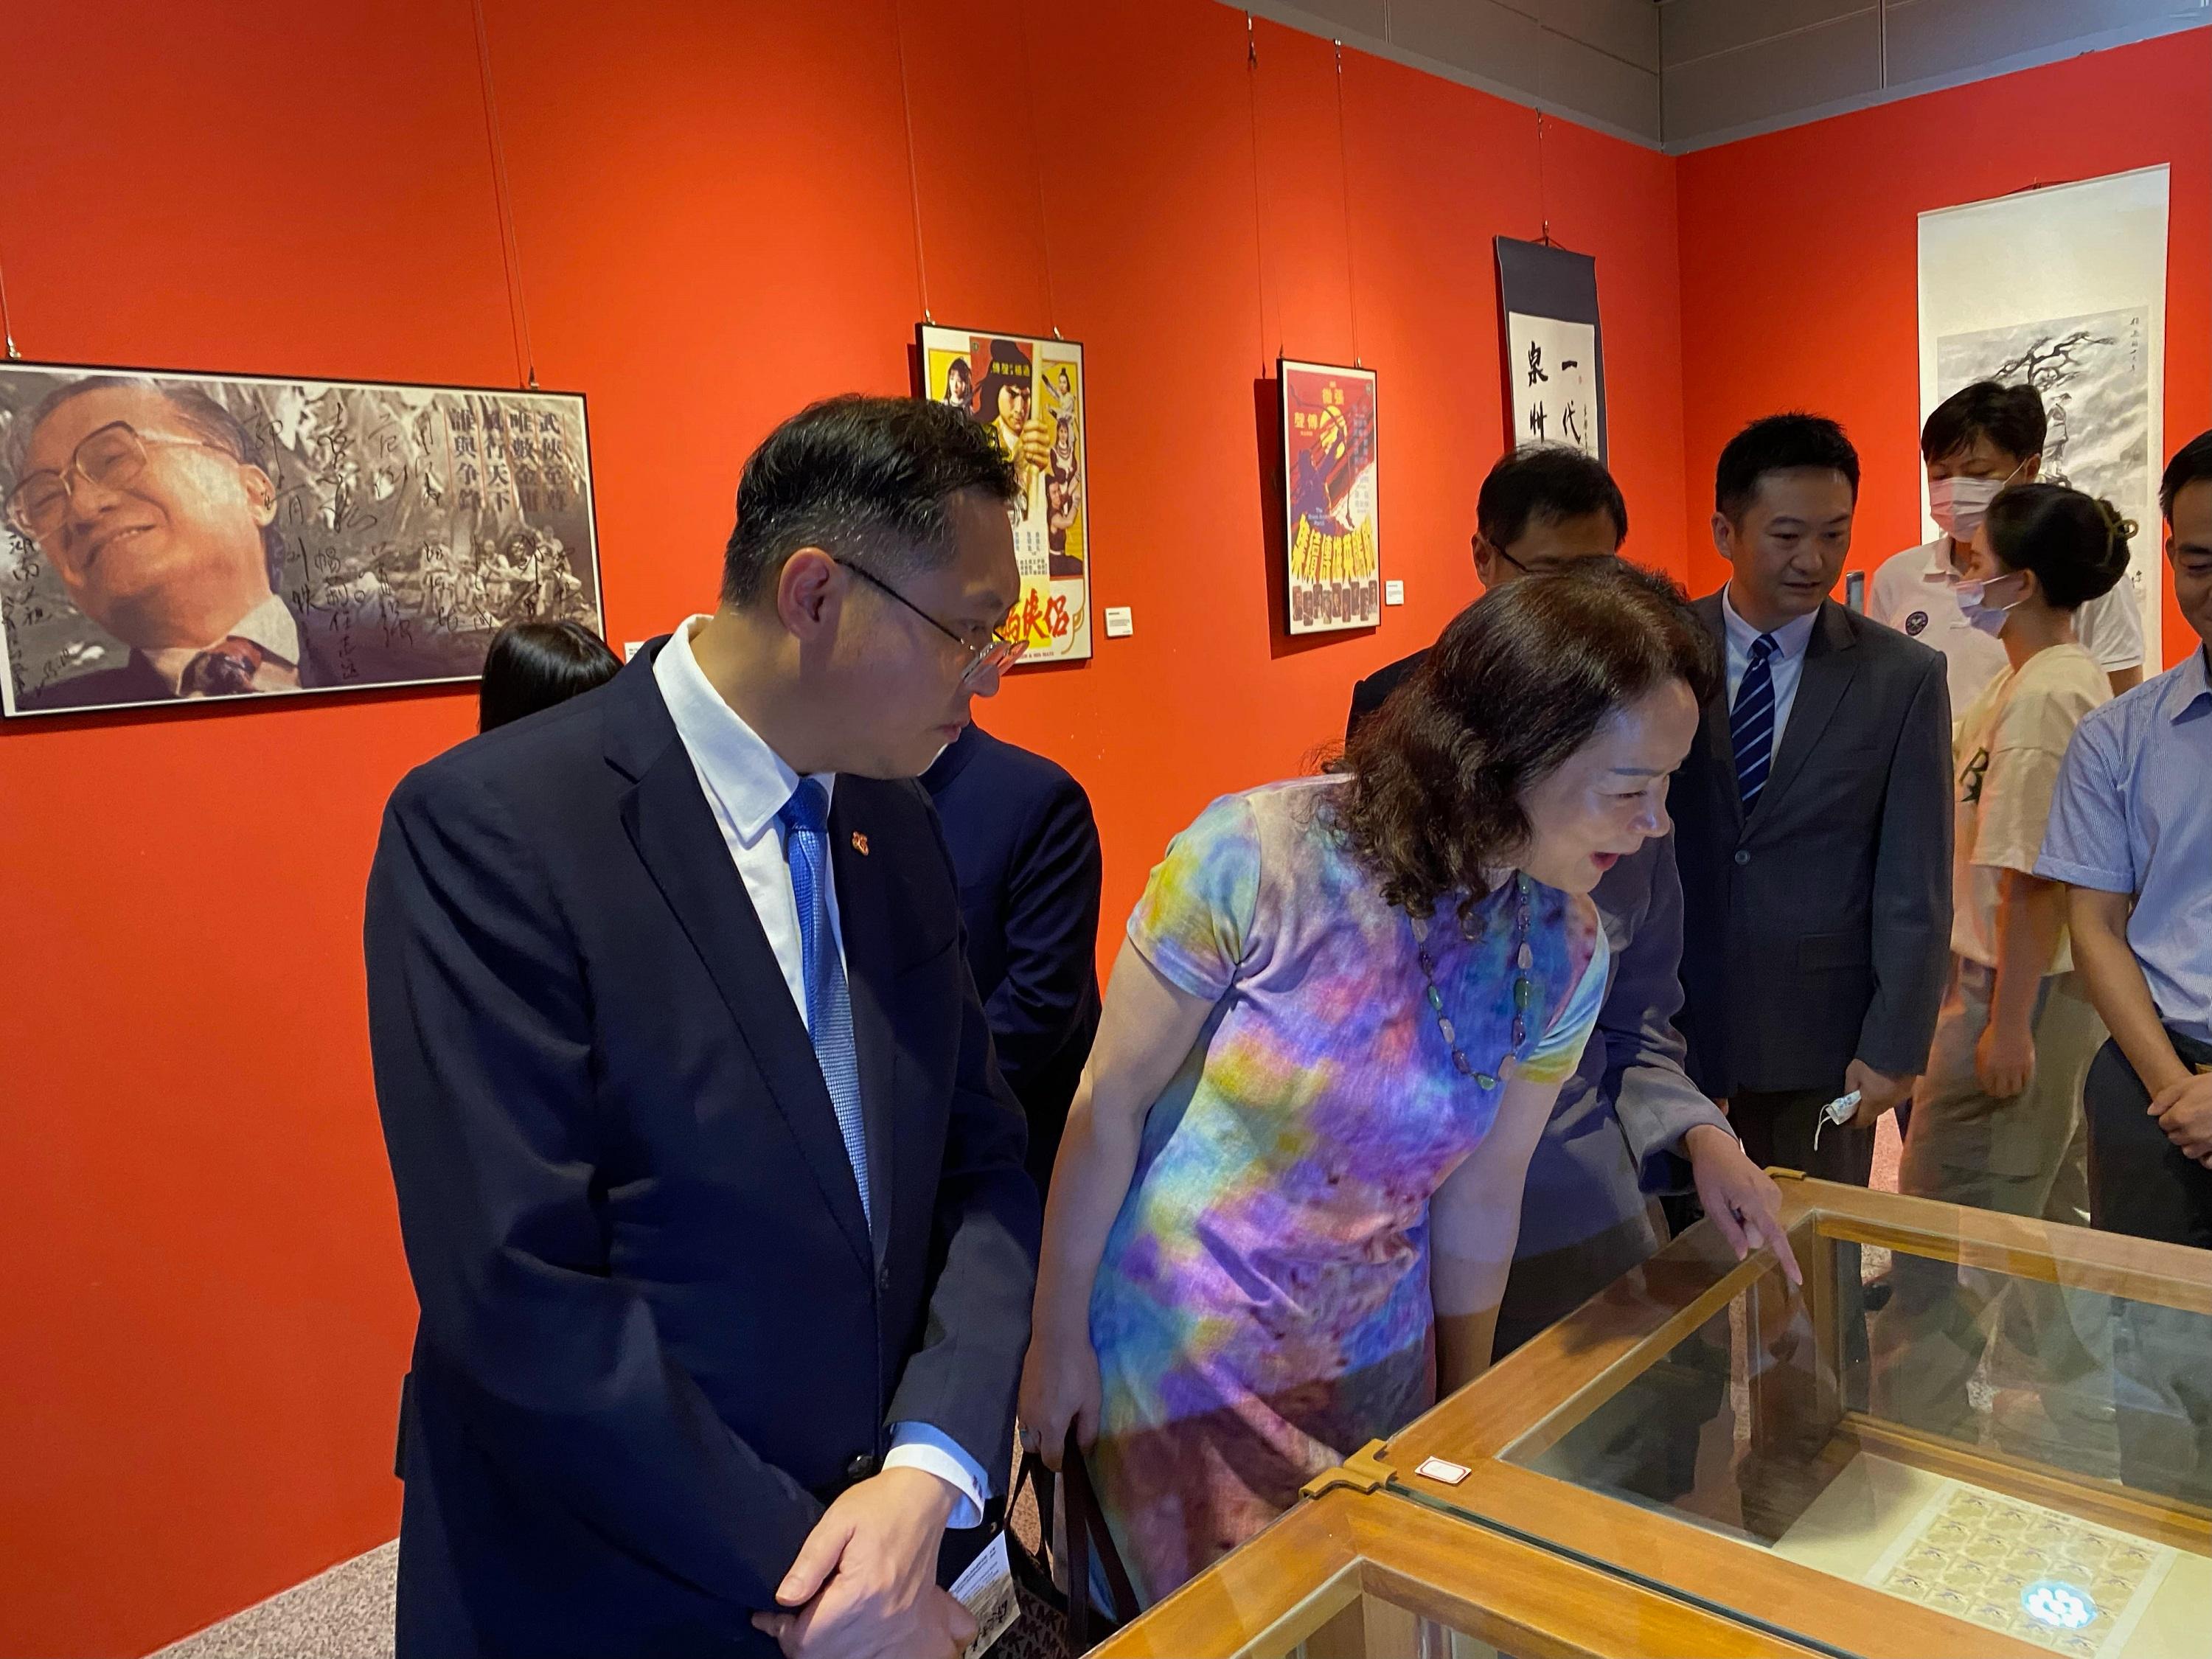 A themed exhibition on the veteran journalist and renowned writer, Dr Louis Cha (pen name Jin Yong), was officially opened today (September 9) at the Hubei Provincial Library in Wuhan. Photo shows the Director of the Hong Kong Economic and Trade Office in Wuhan, Mr Franco Kwok (first left), the Director General of the Hong Kong and Macao Affairs Office of Hubei Province, Ms Zhang Xiao-mei (second left), and other guests touring the exhibition.